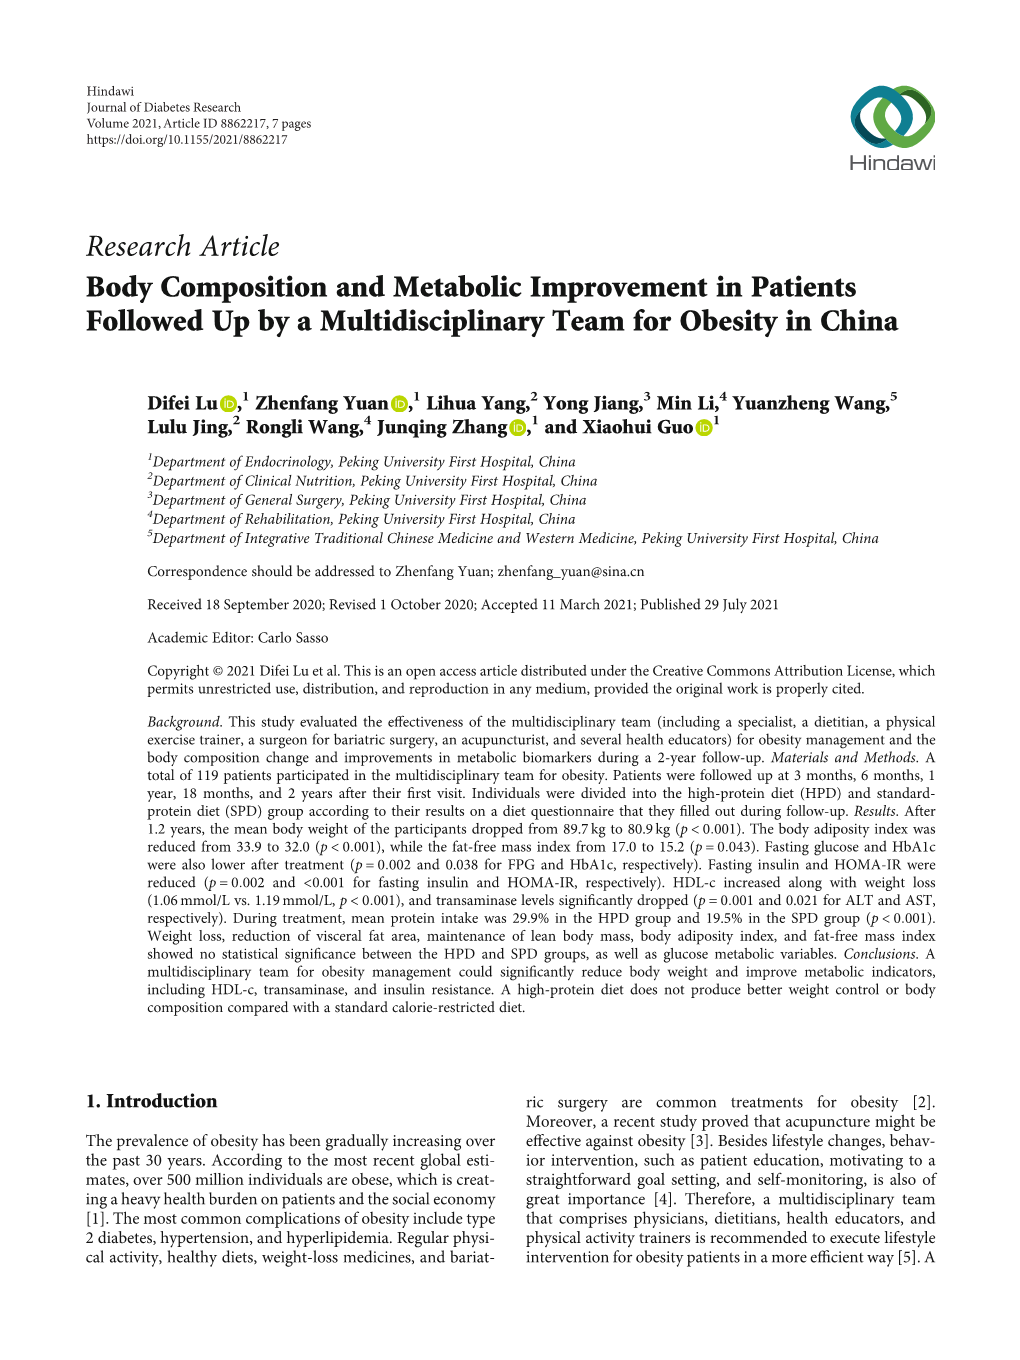 Body Composition and Metabolic Improvement in Patients Followed up by a Multidisciplinary Team for Obesity in China